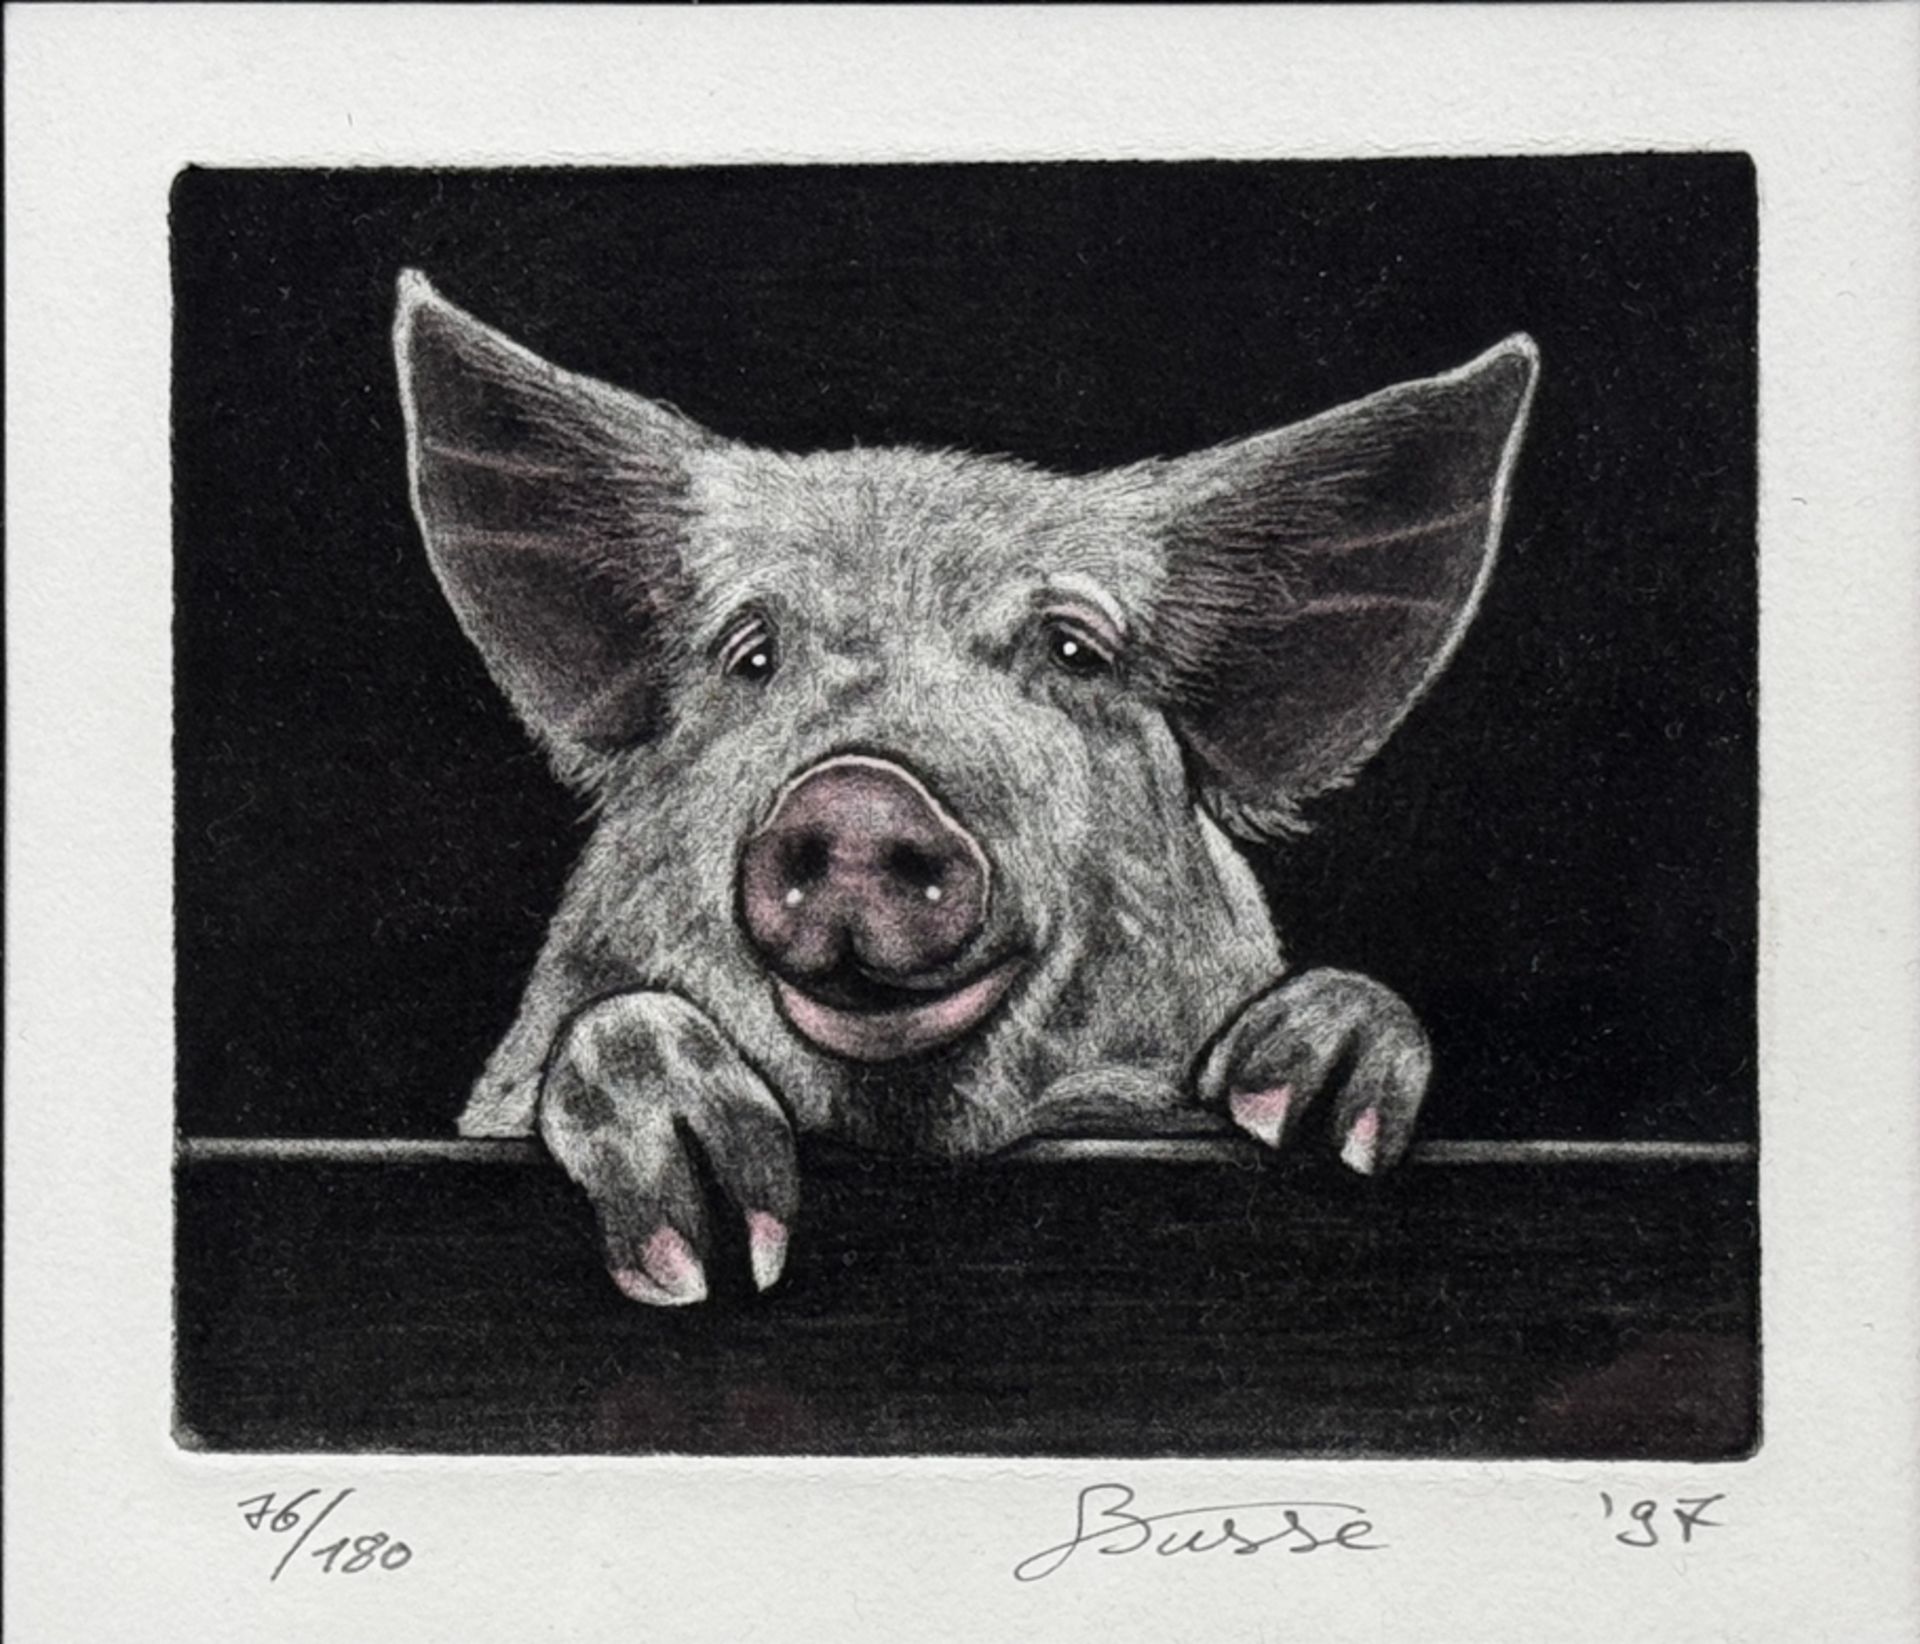 Busse (20th century) "Pig", etching, copy 76/180, signed by hand at bottom, dated (19)97 at bottom